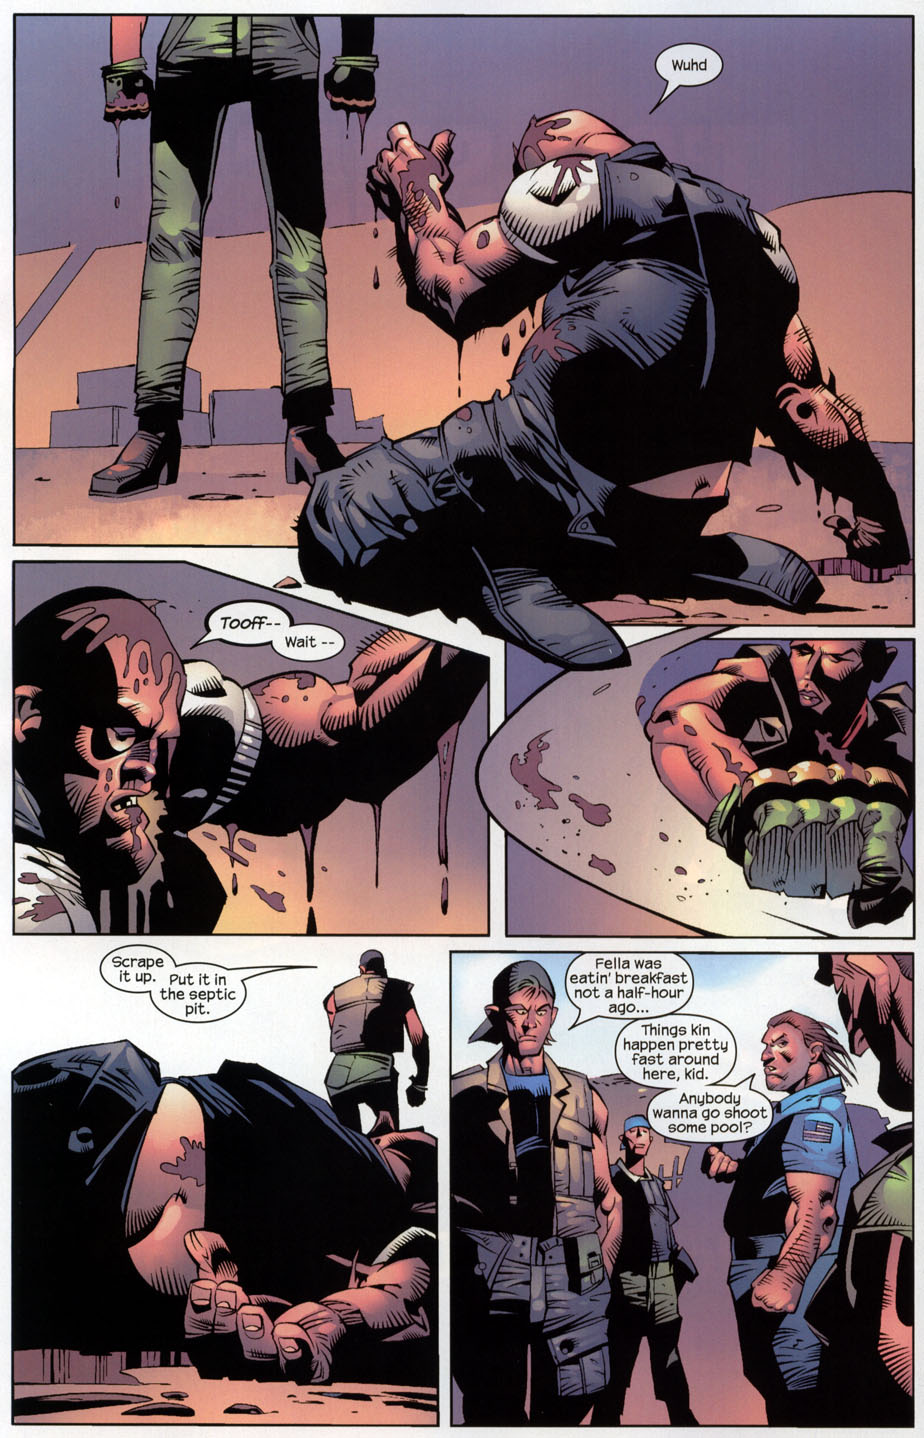 The Punisher (2001) issue 29 - Streets of Laredo #02 - Page 9